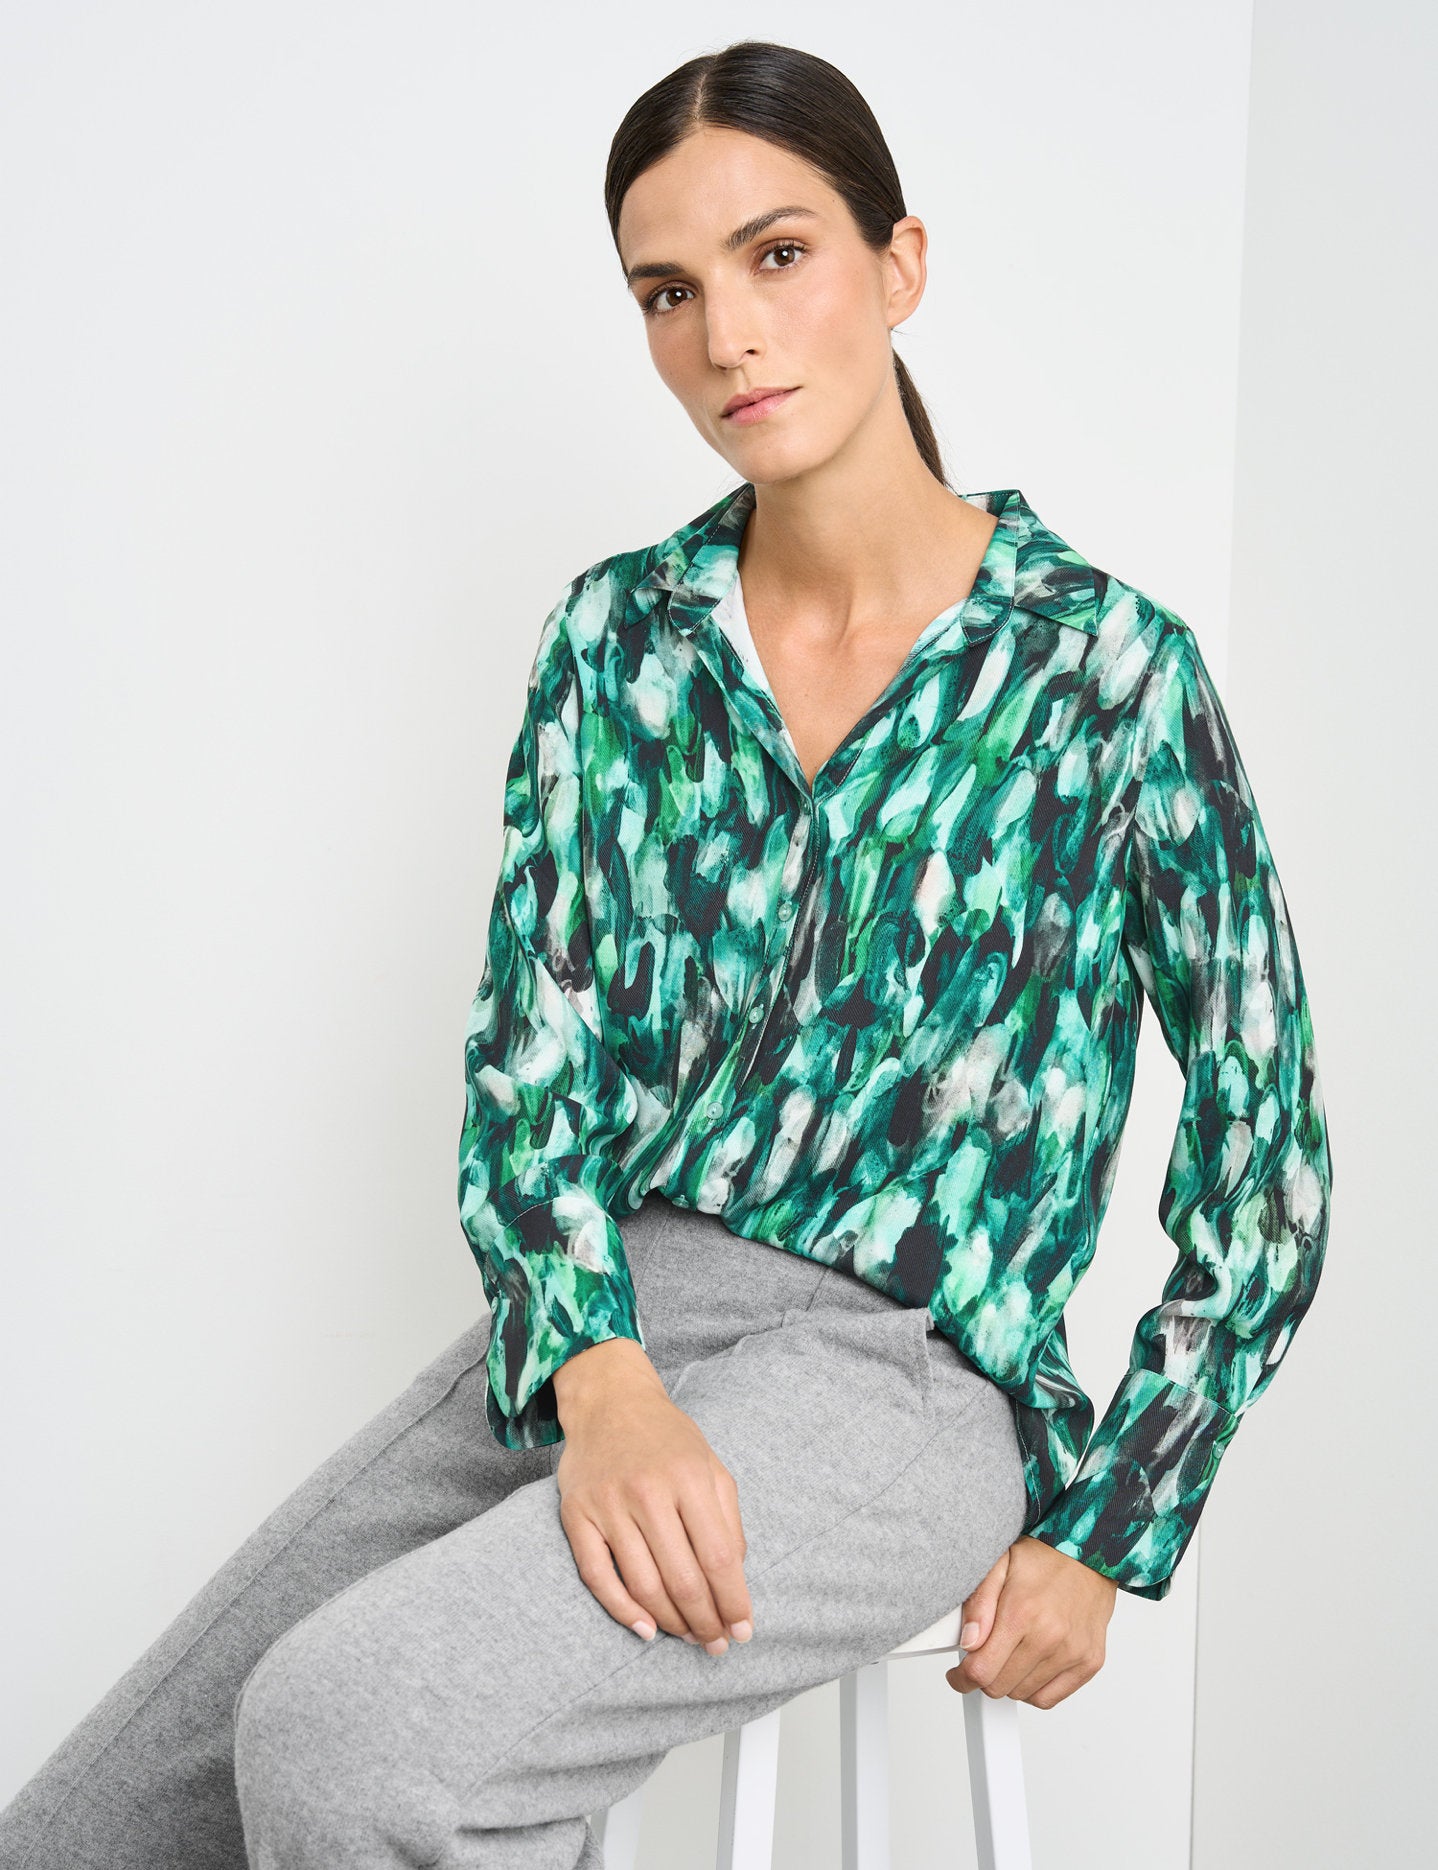 Flowing Long Sleeve Blouse With An All-Over Pattern_160038-66430_5098_05